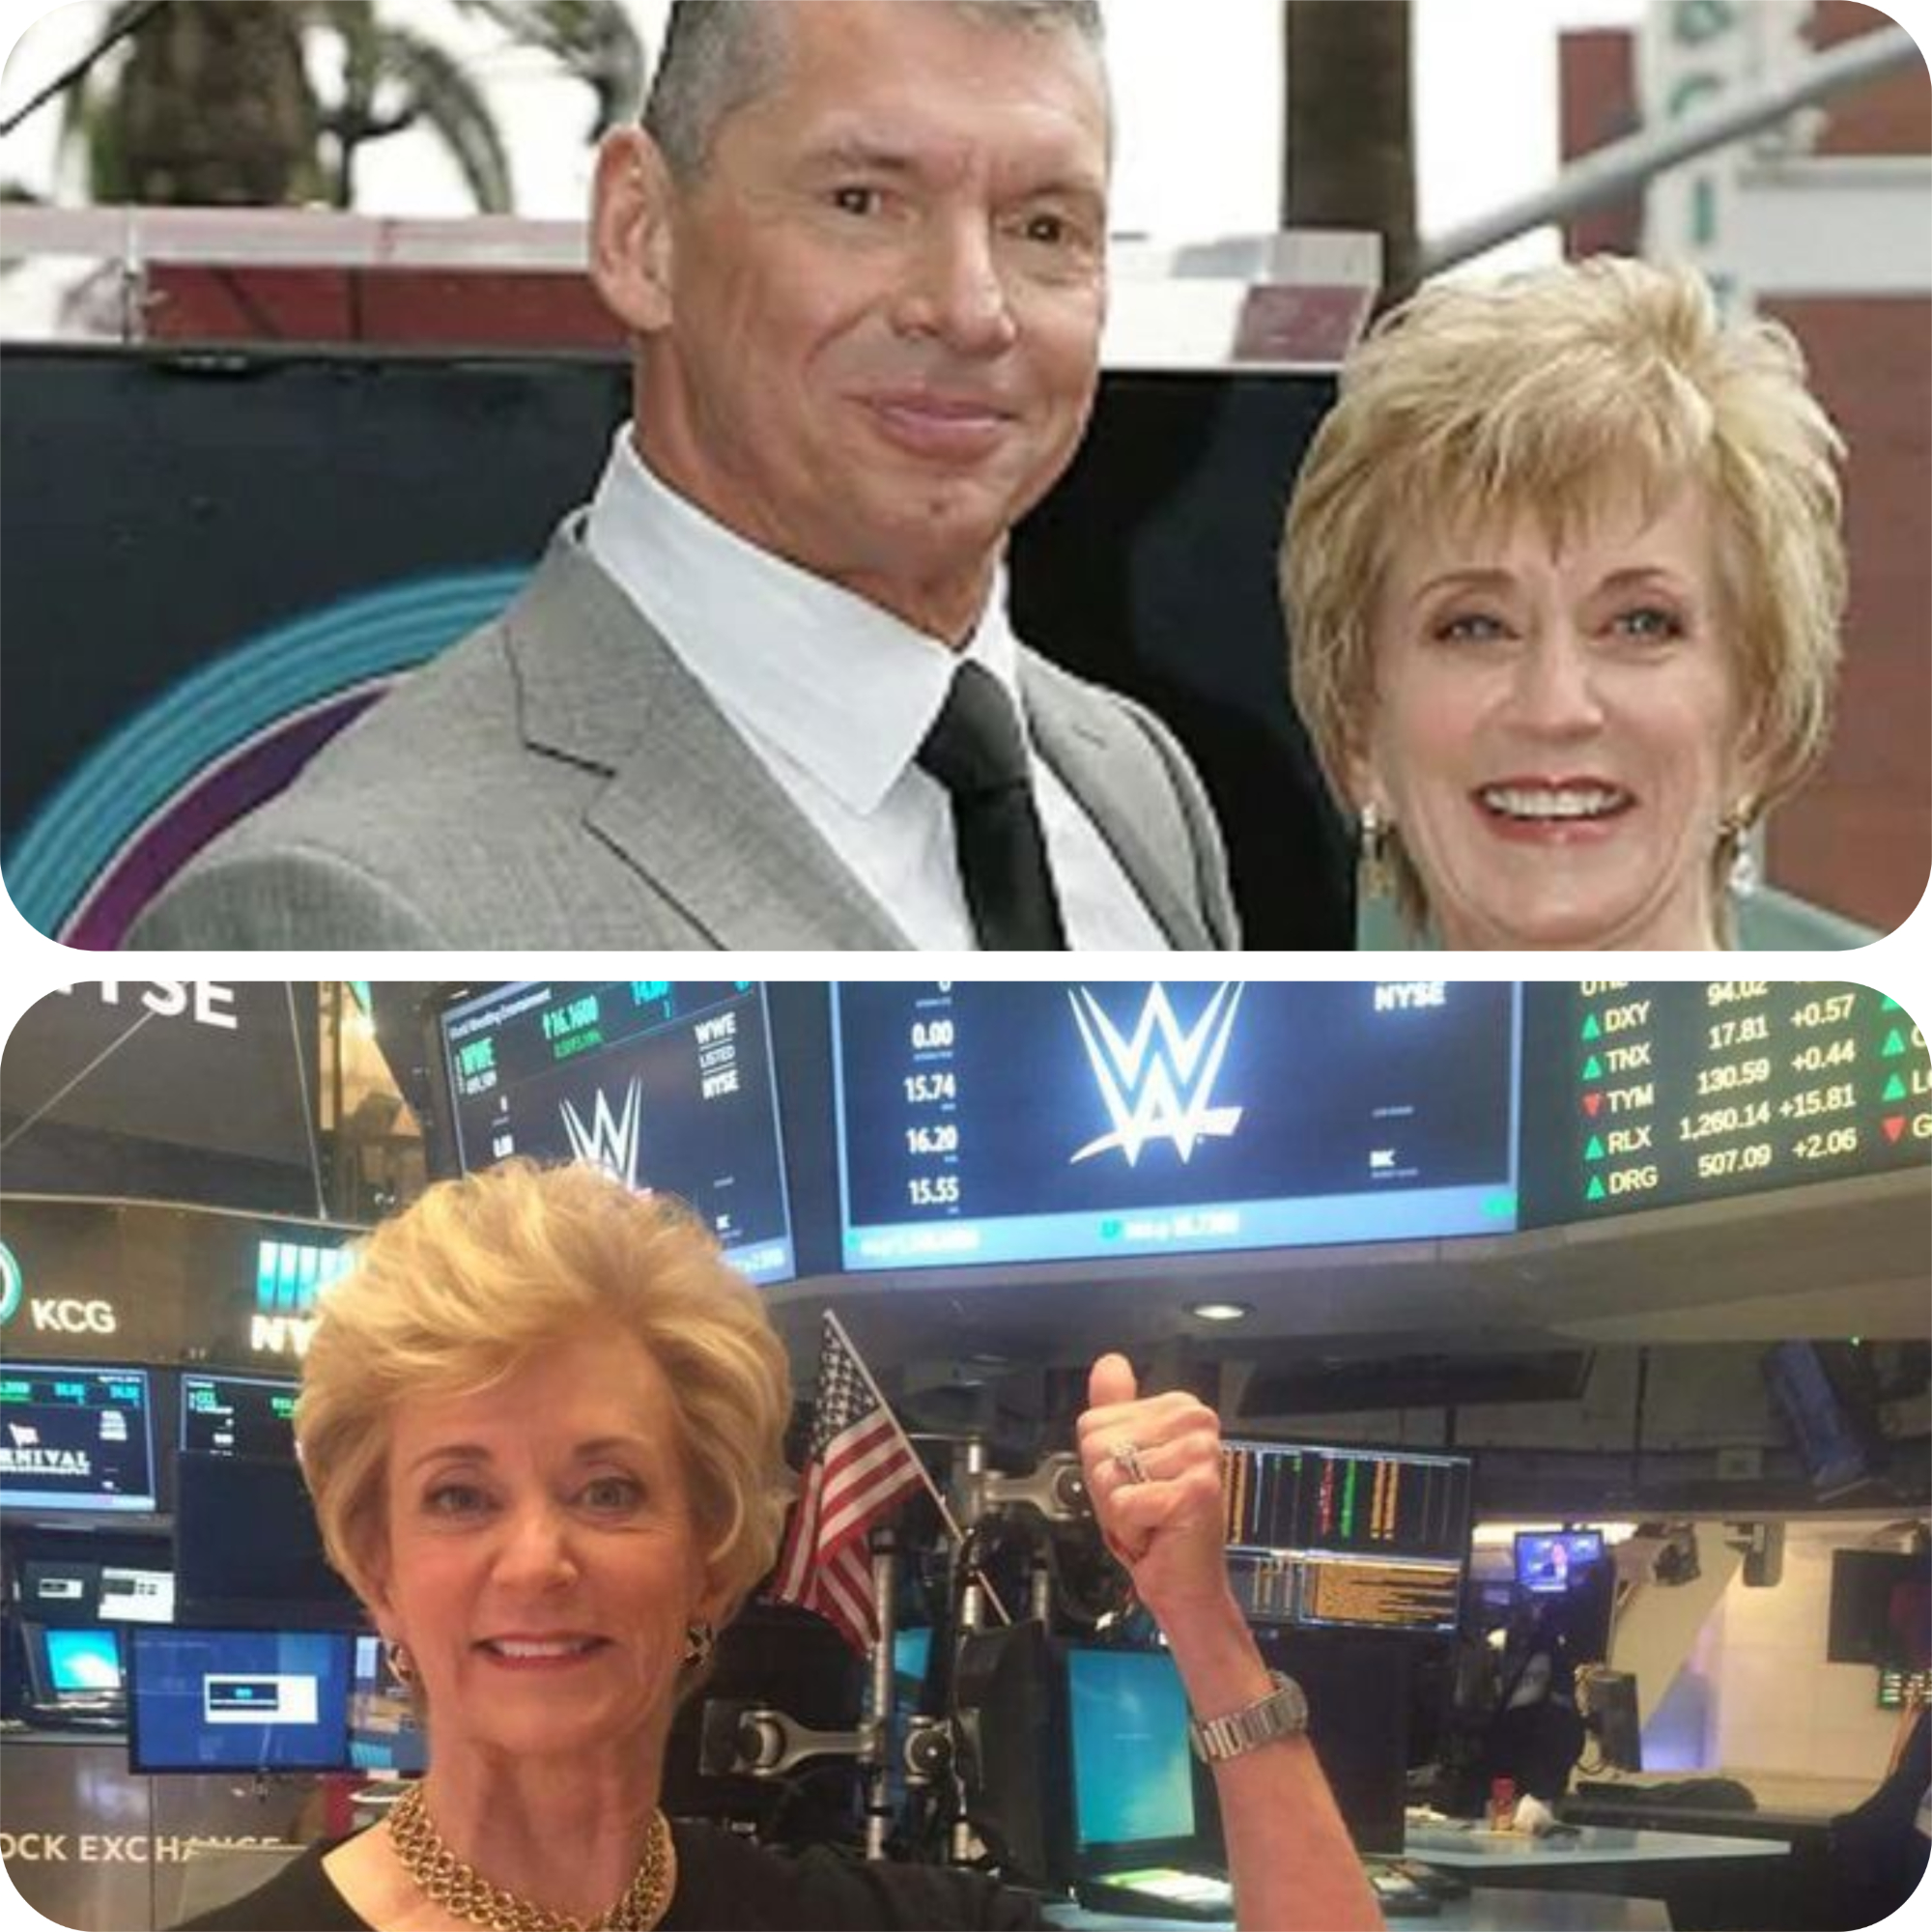 WWE Founder Vince McMahon's Wife Linda Considered $2.3 Billion Divorce Before Bombshell Sex Trafficking Allegations